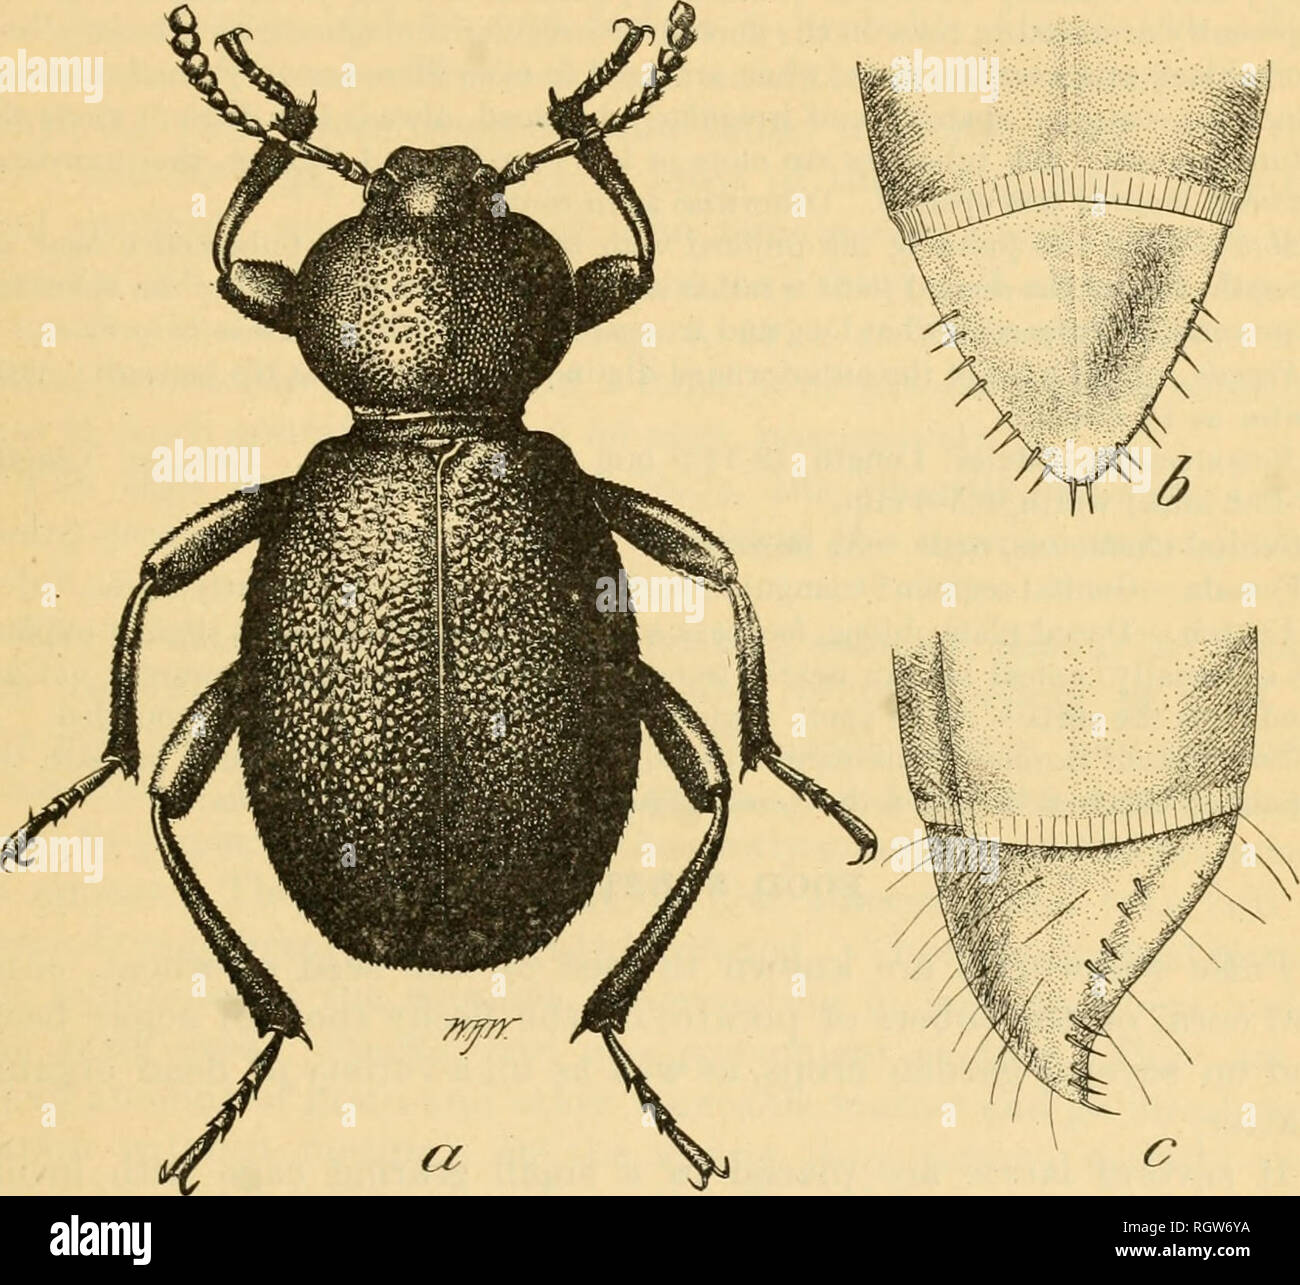 . Bulletin. Insects; Insect pests; Entomology; Insects; Insect pests; Entomology. FALSE WIKEWORMS OF PACIFIC NOETHWEST. 81 depressed, faintly striate. Caudal segment scutelliform, slightly convex dorsally, margined laterally, tip curved slightly upward, bearing 18 acute spines on margin— 4 groups of 2 spines each on each lateral margin and 2 spines at tip. A number of hairs on dorsal surface and many on ventral surface. Head subquadrate, very convex, sides converging anteriorly, posterior angles rounded, 2 hairs on lateral dorsal and several hairs on ventral surface; 2 black eye spots on later Stock Photo